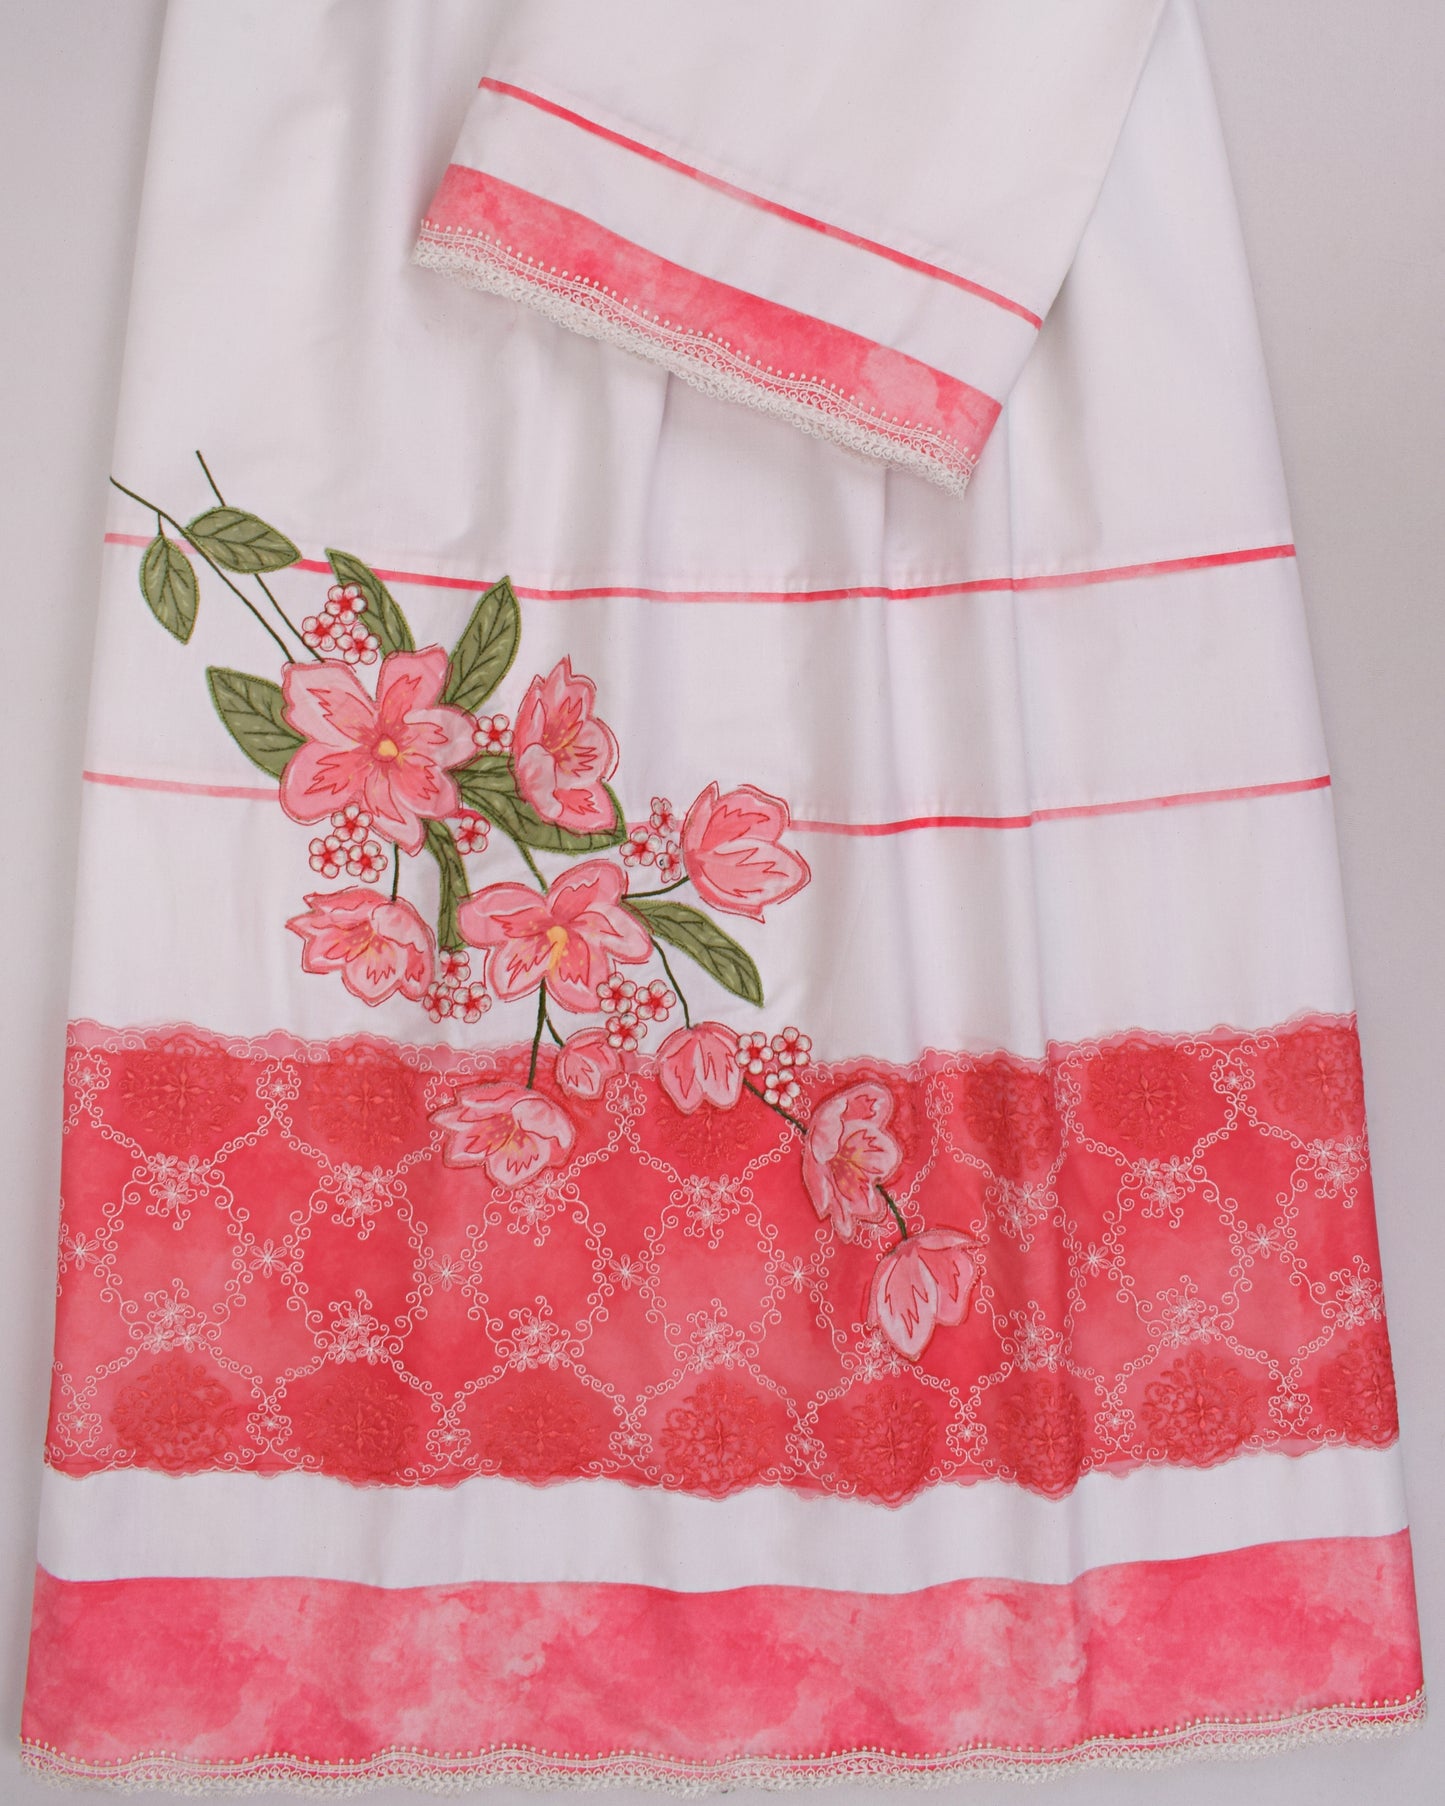 Off White With Applique Embroidery With Piping Pattern